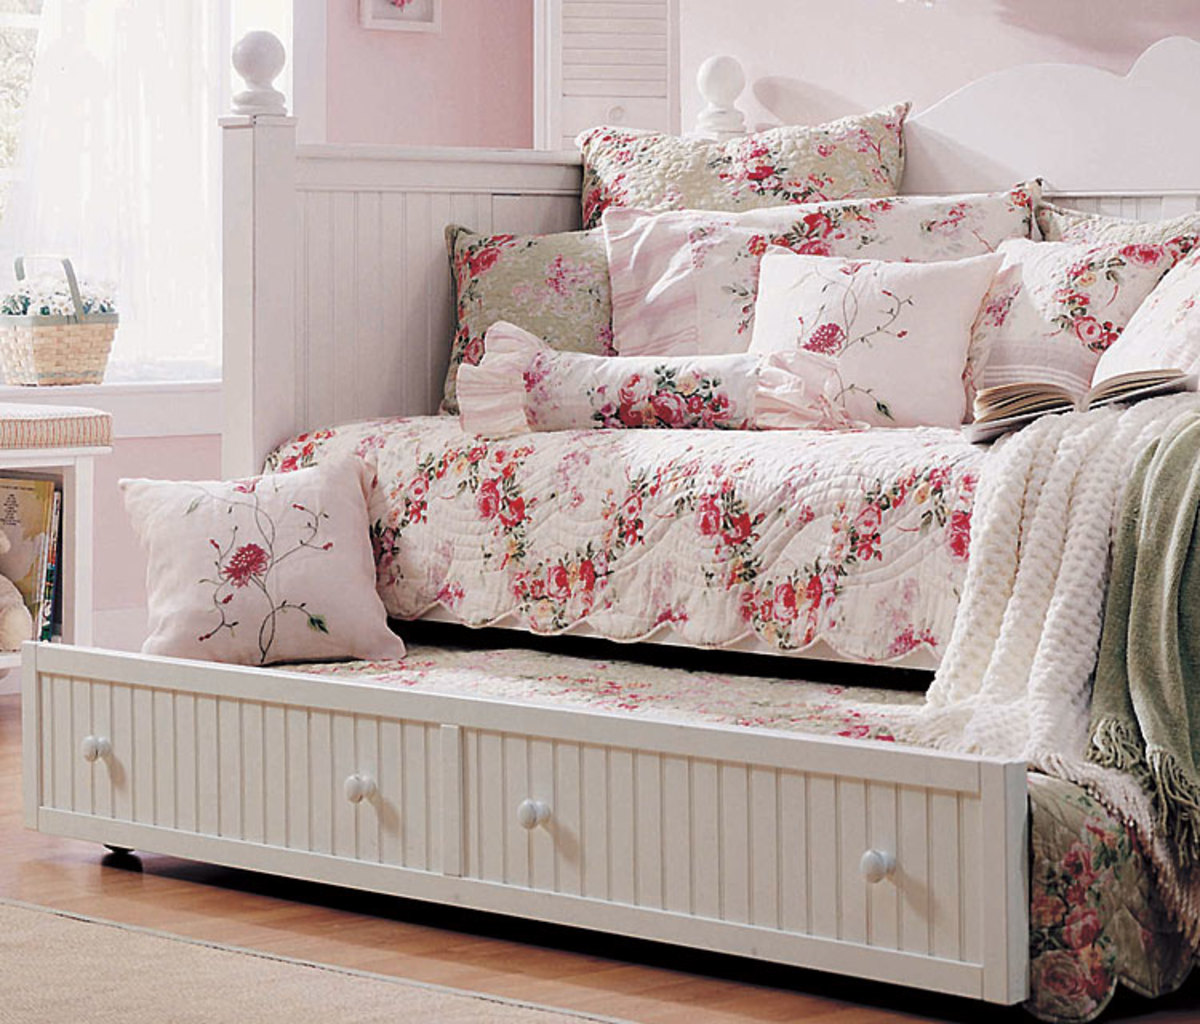 Daybeds and Trundle Beds - New Luxury Items for the Spare Bedroom